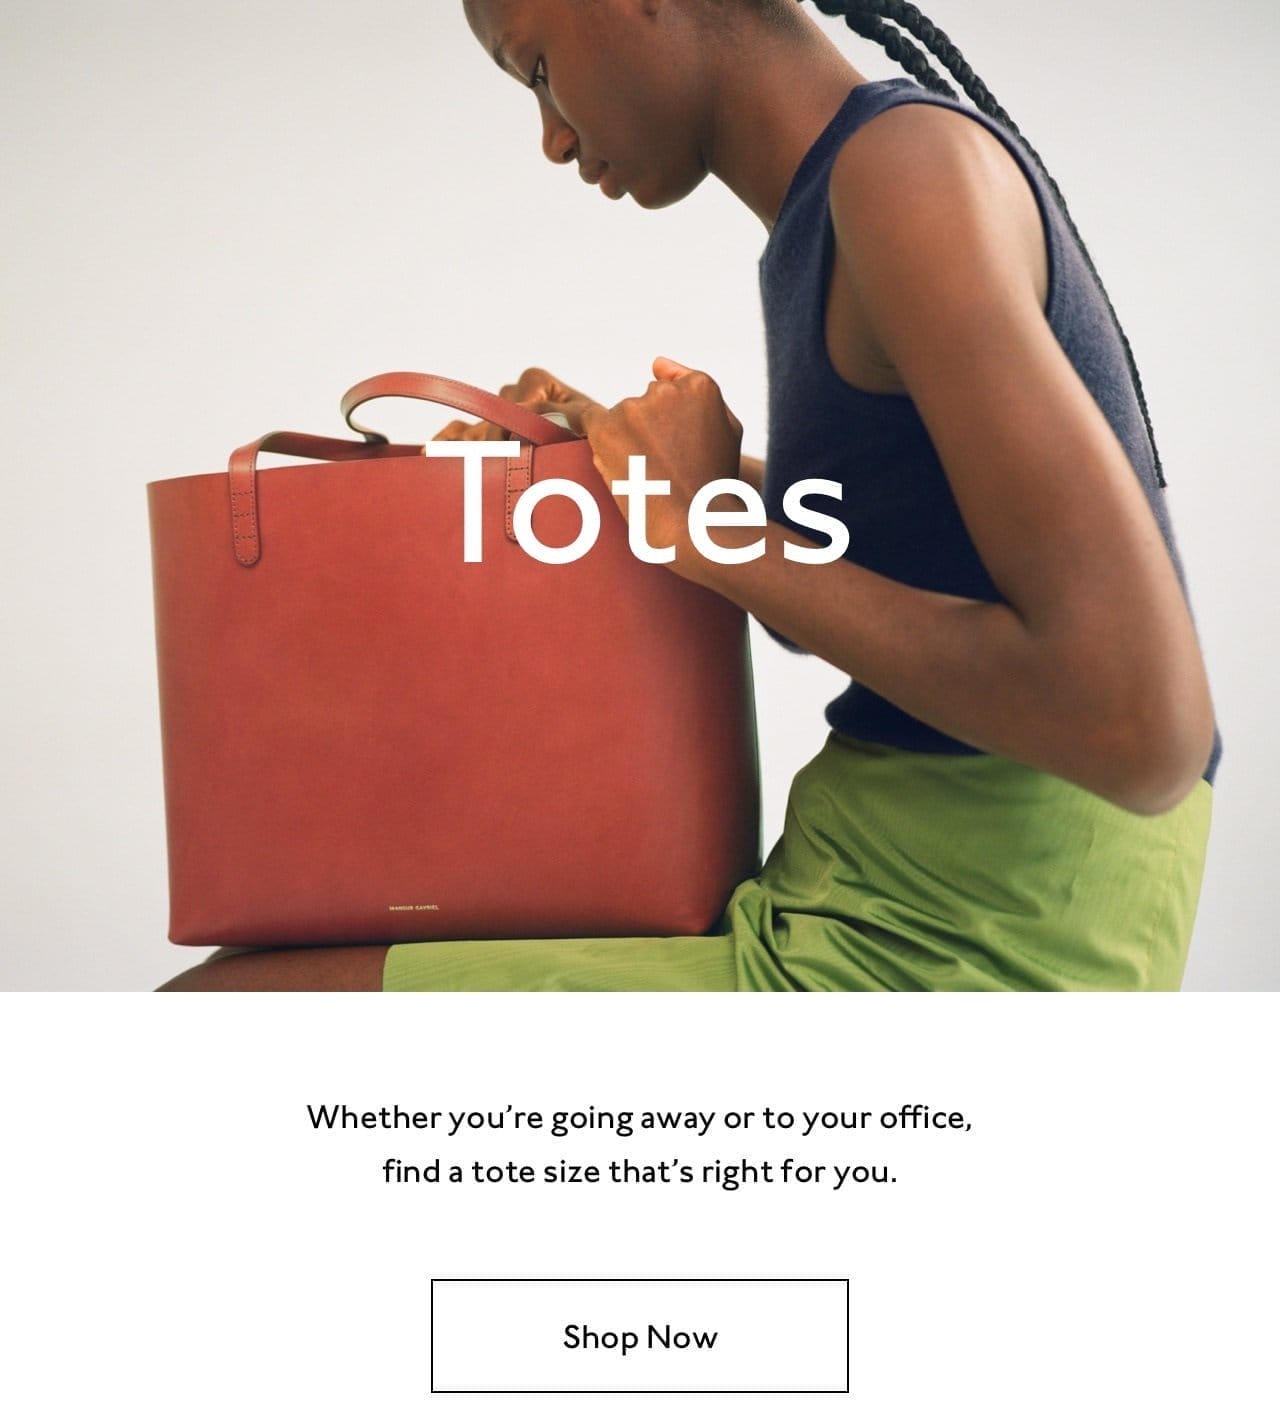 Whether you're going away or to your office, find a tote size that's right for you. Shop now.